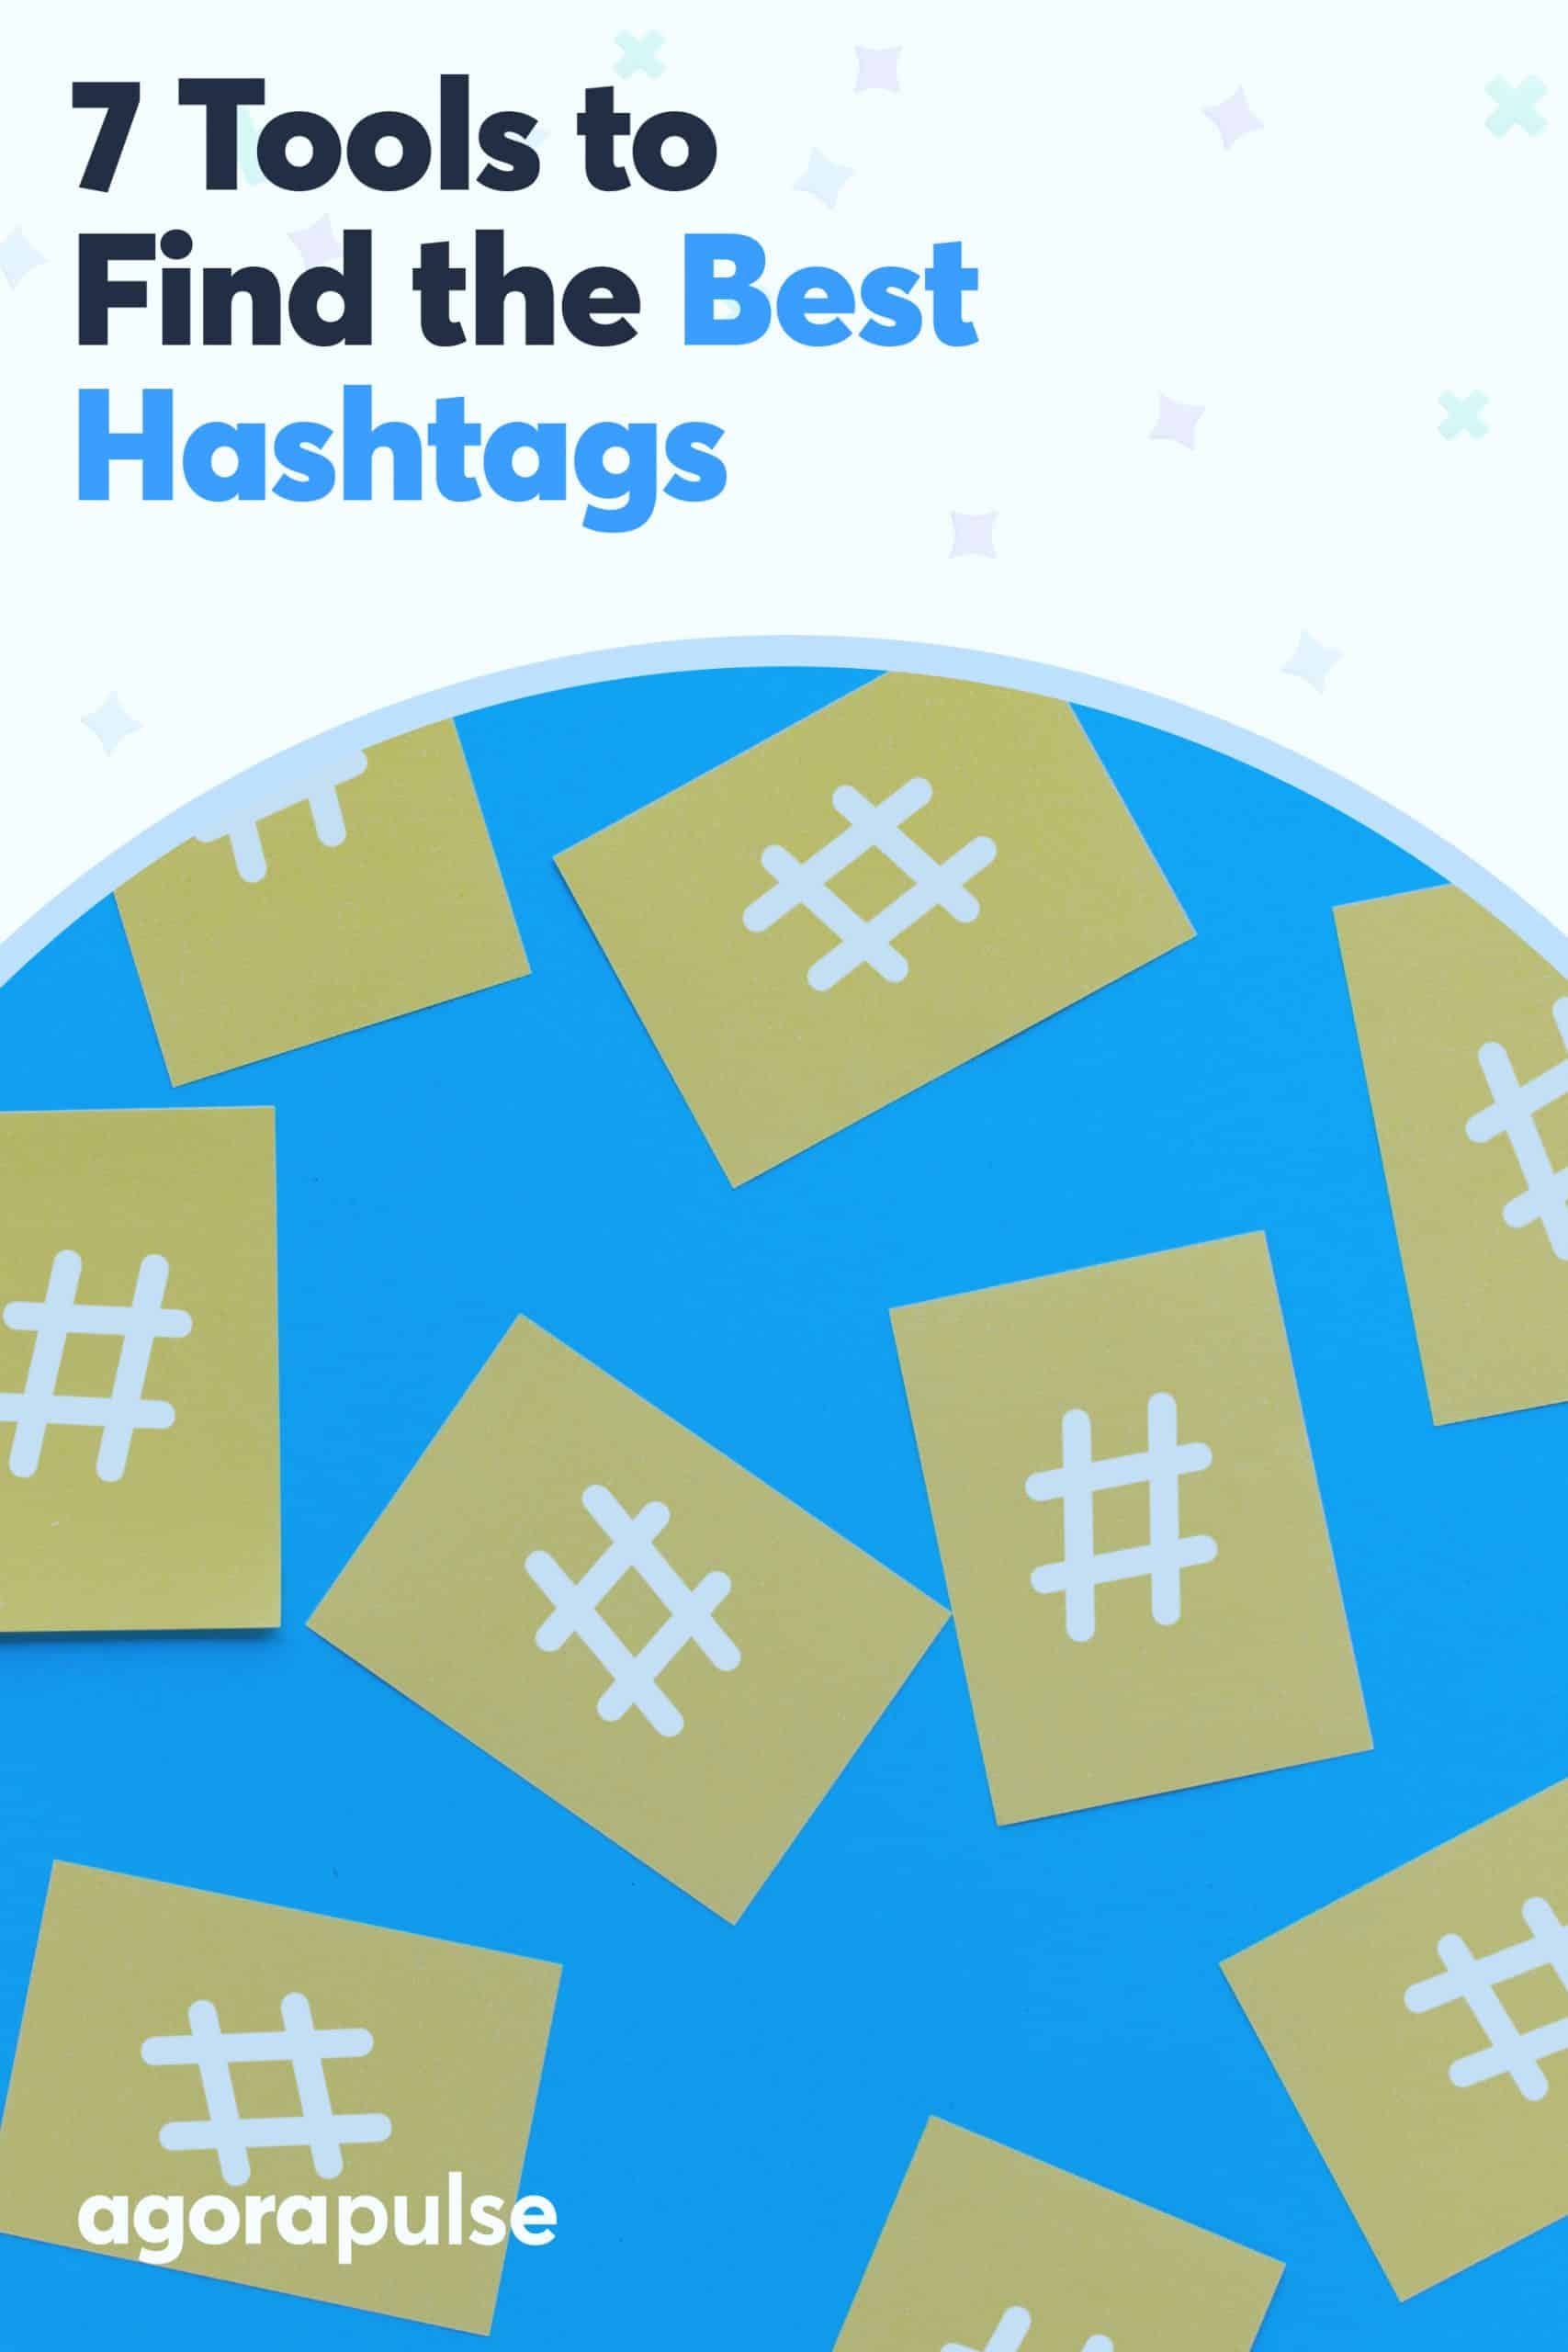 7 Tools to Find the Best Hashtags